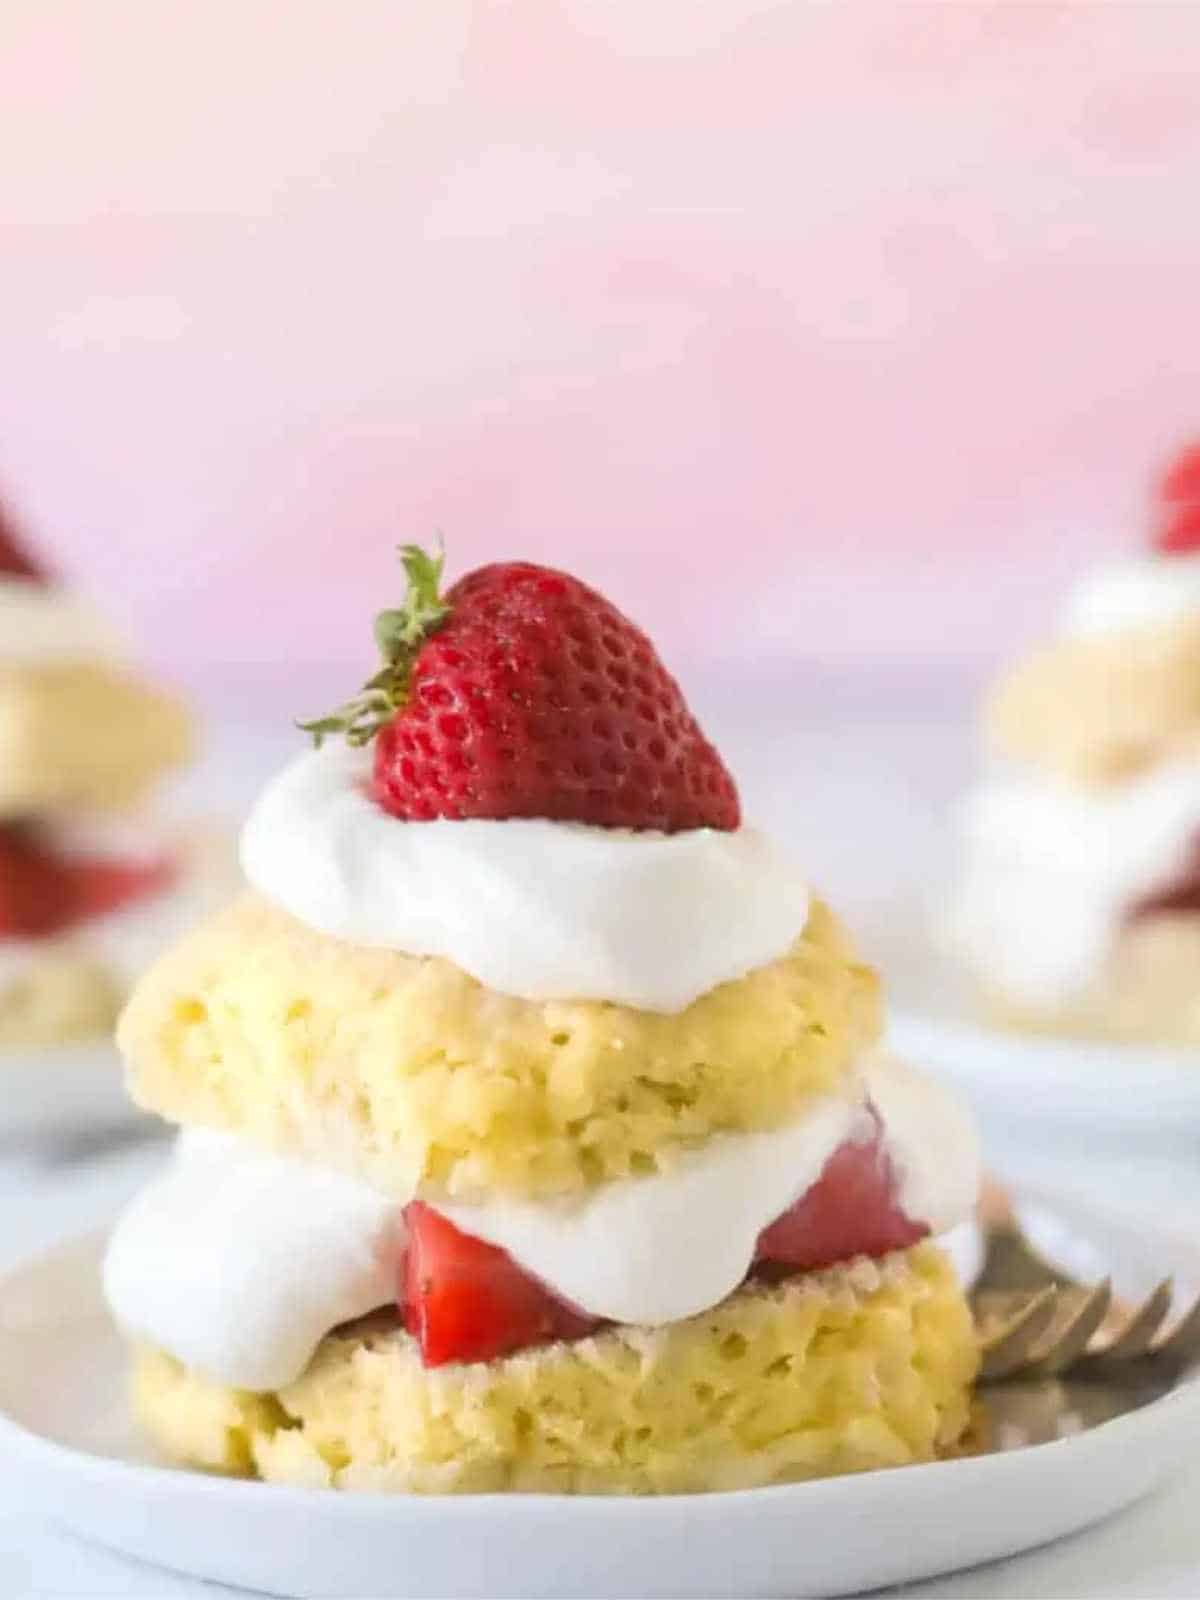 biscuits and strawberry dessert recipes.